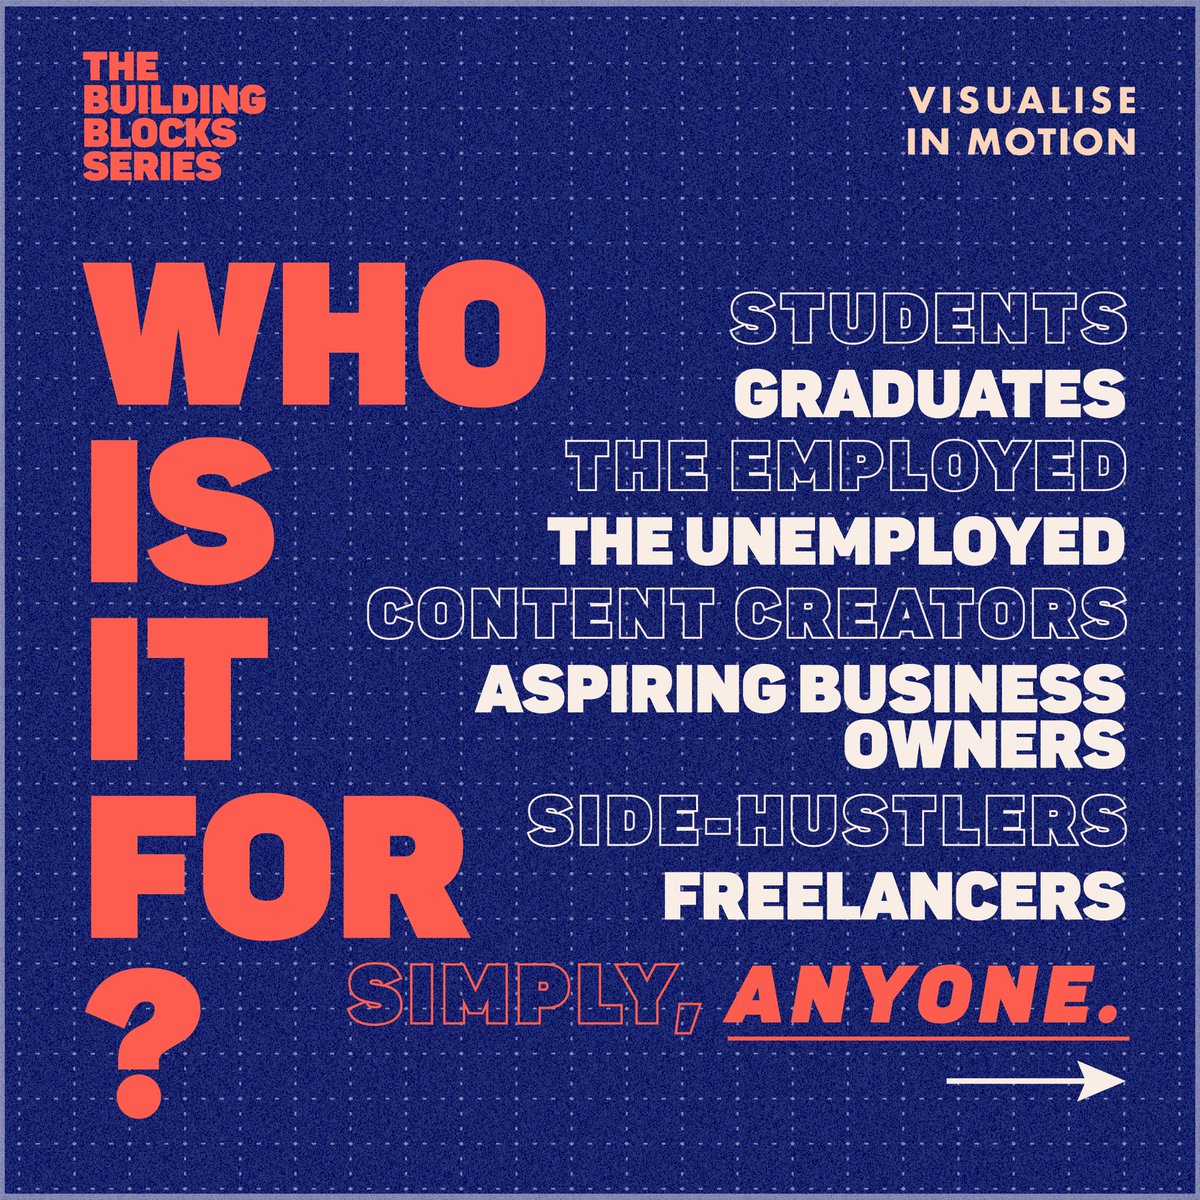 Anyway, I've only really come back to share the fact that  @AllWeDoIsVIM has released its first programme 'The Building Blocks Series'. The series looks at what I call the unsexy elements of creative entrepreneurship - business formation, accounting, contracts, etc.